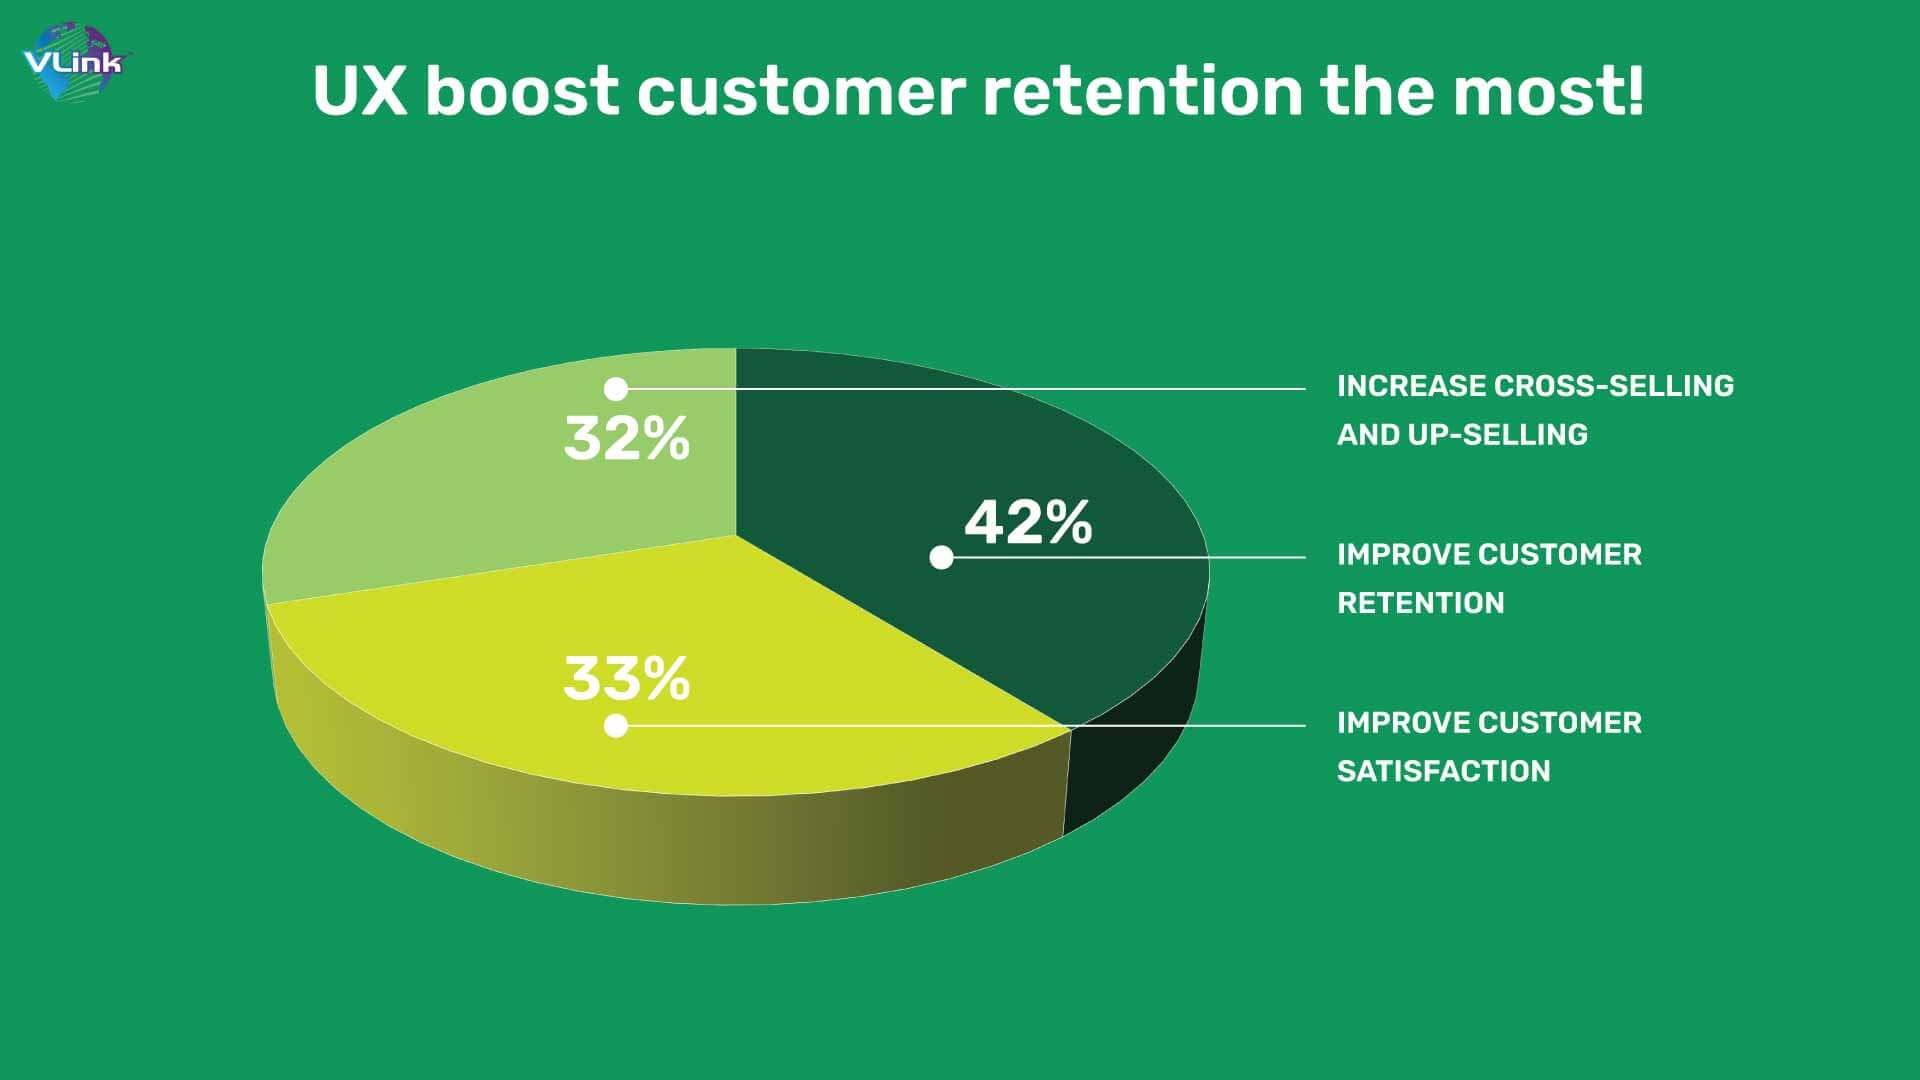 UX boost customer retention the most